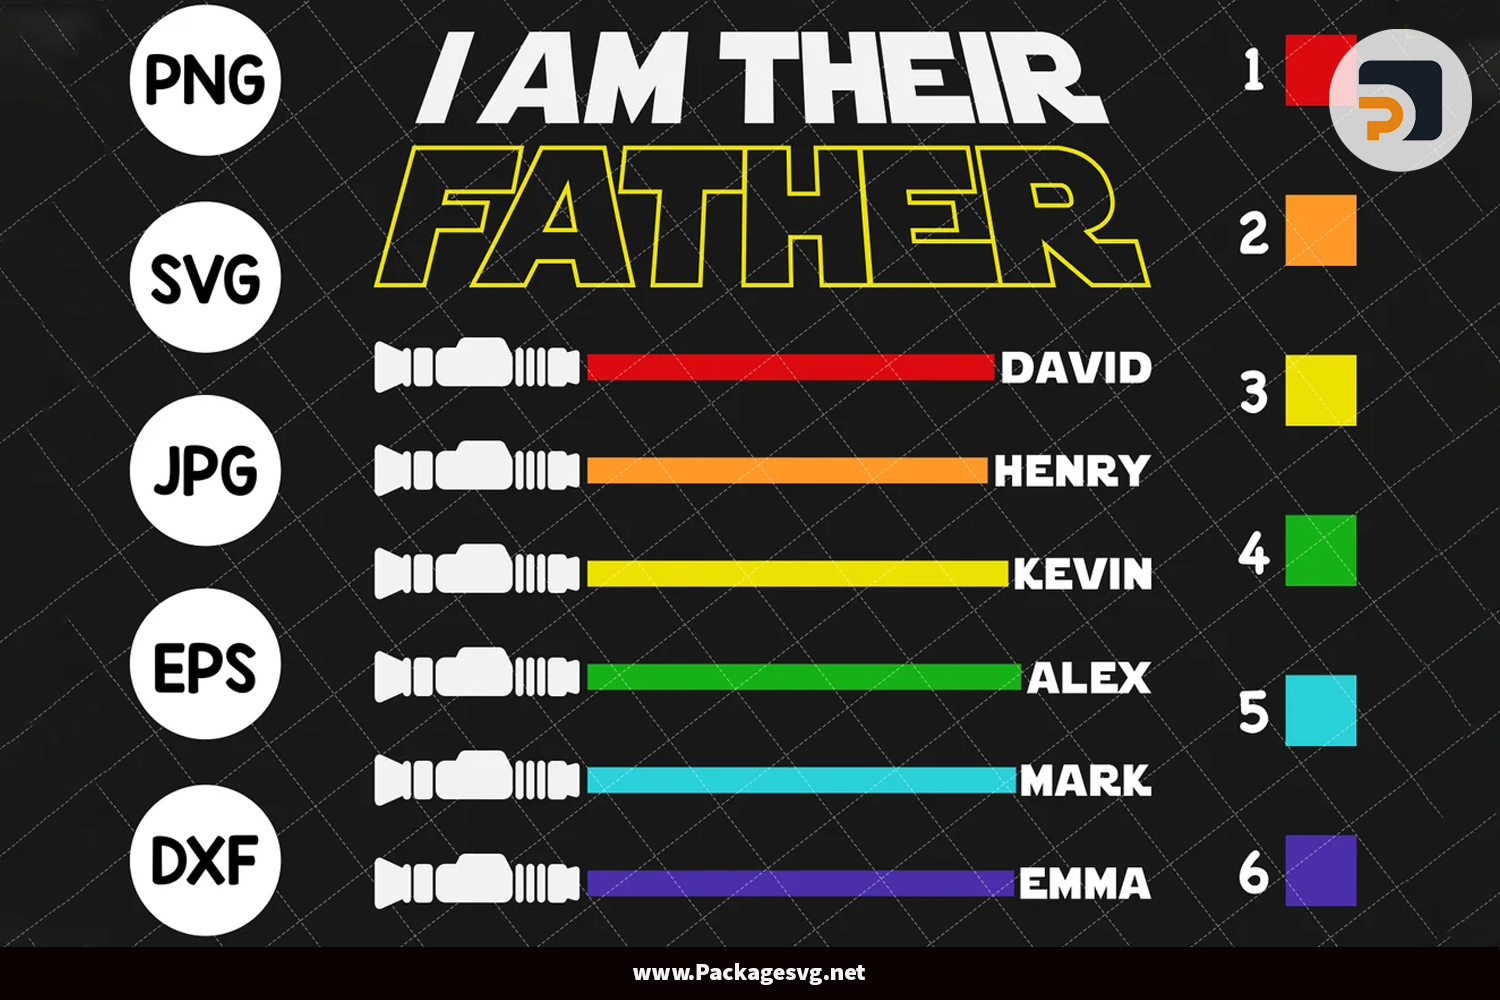 I Am Their Father SVG